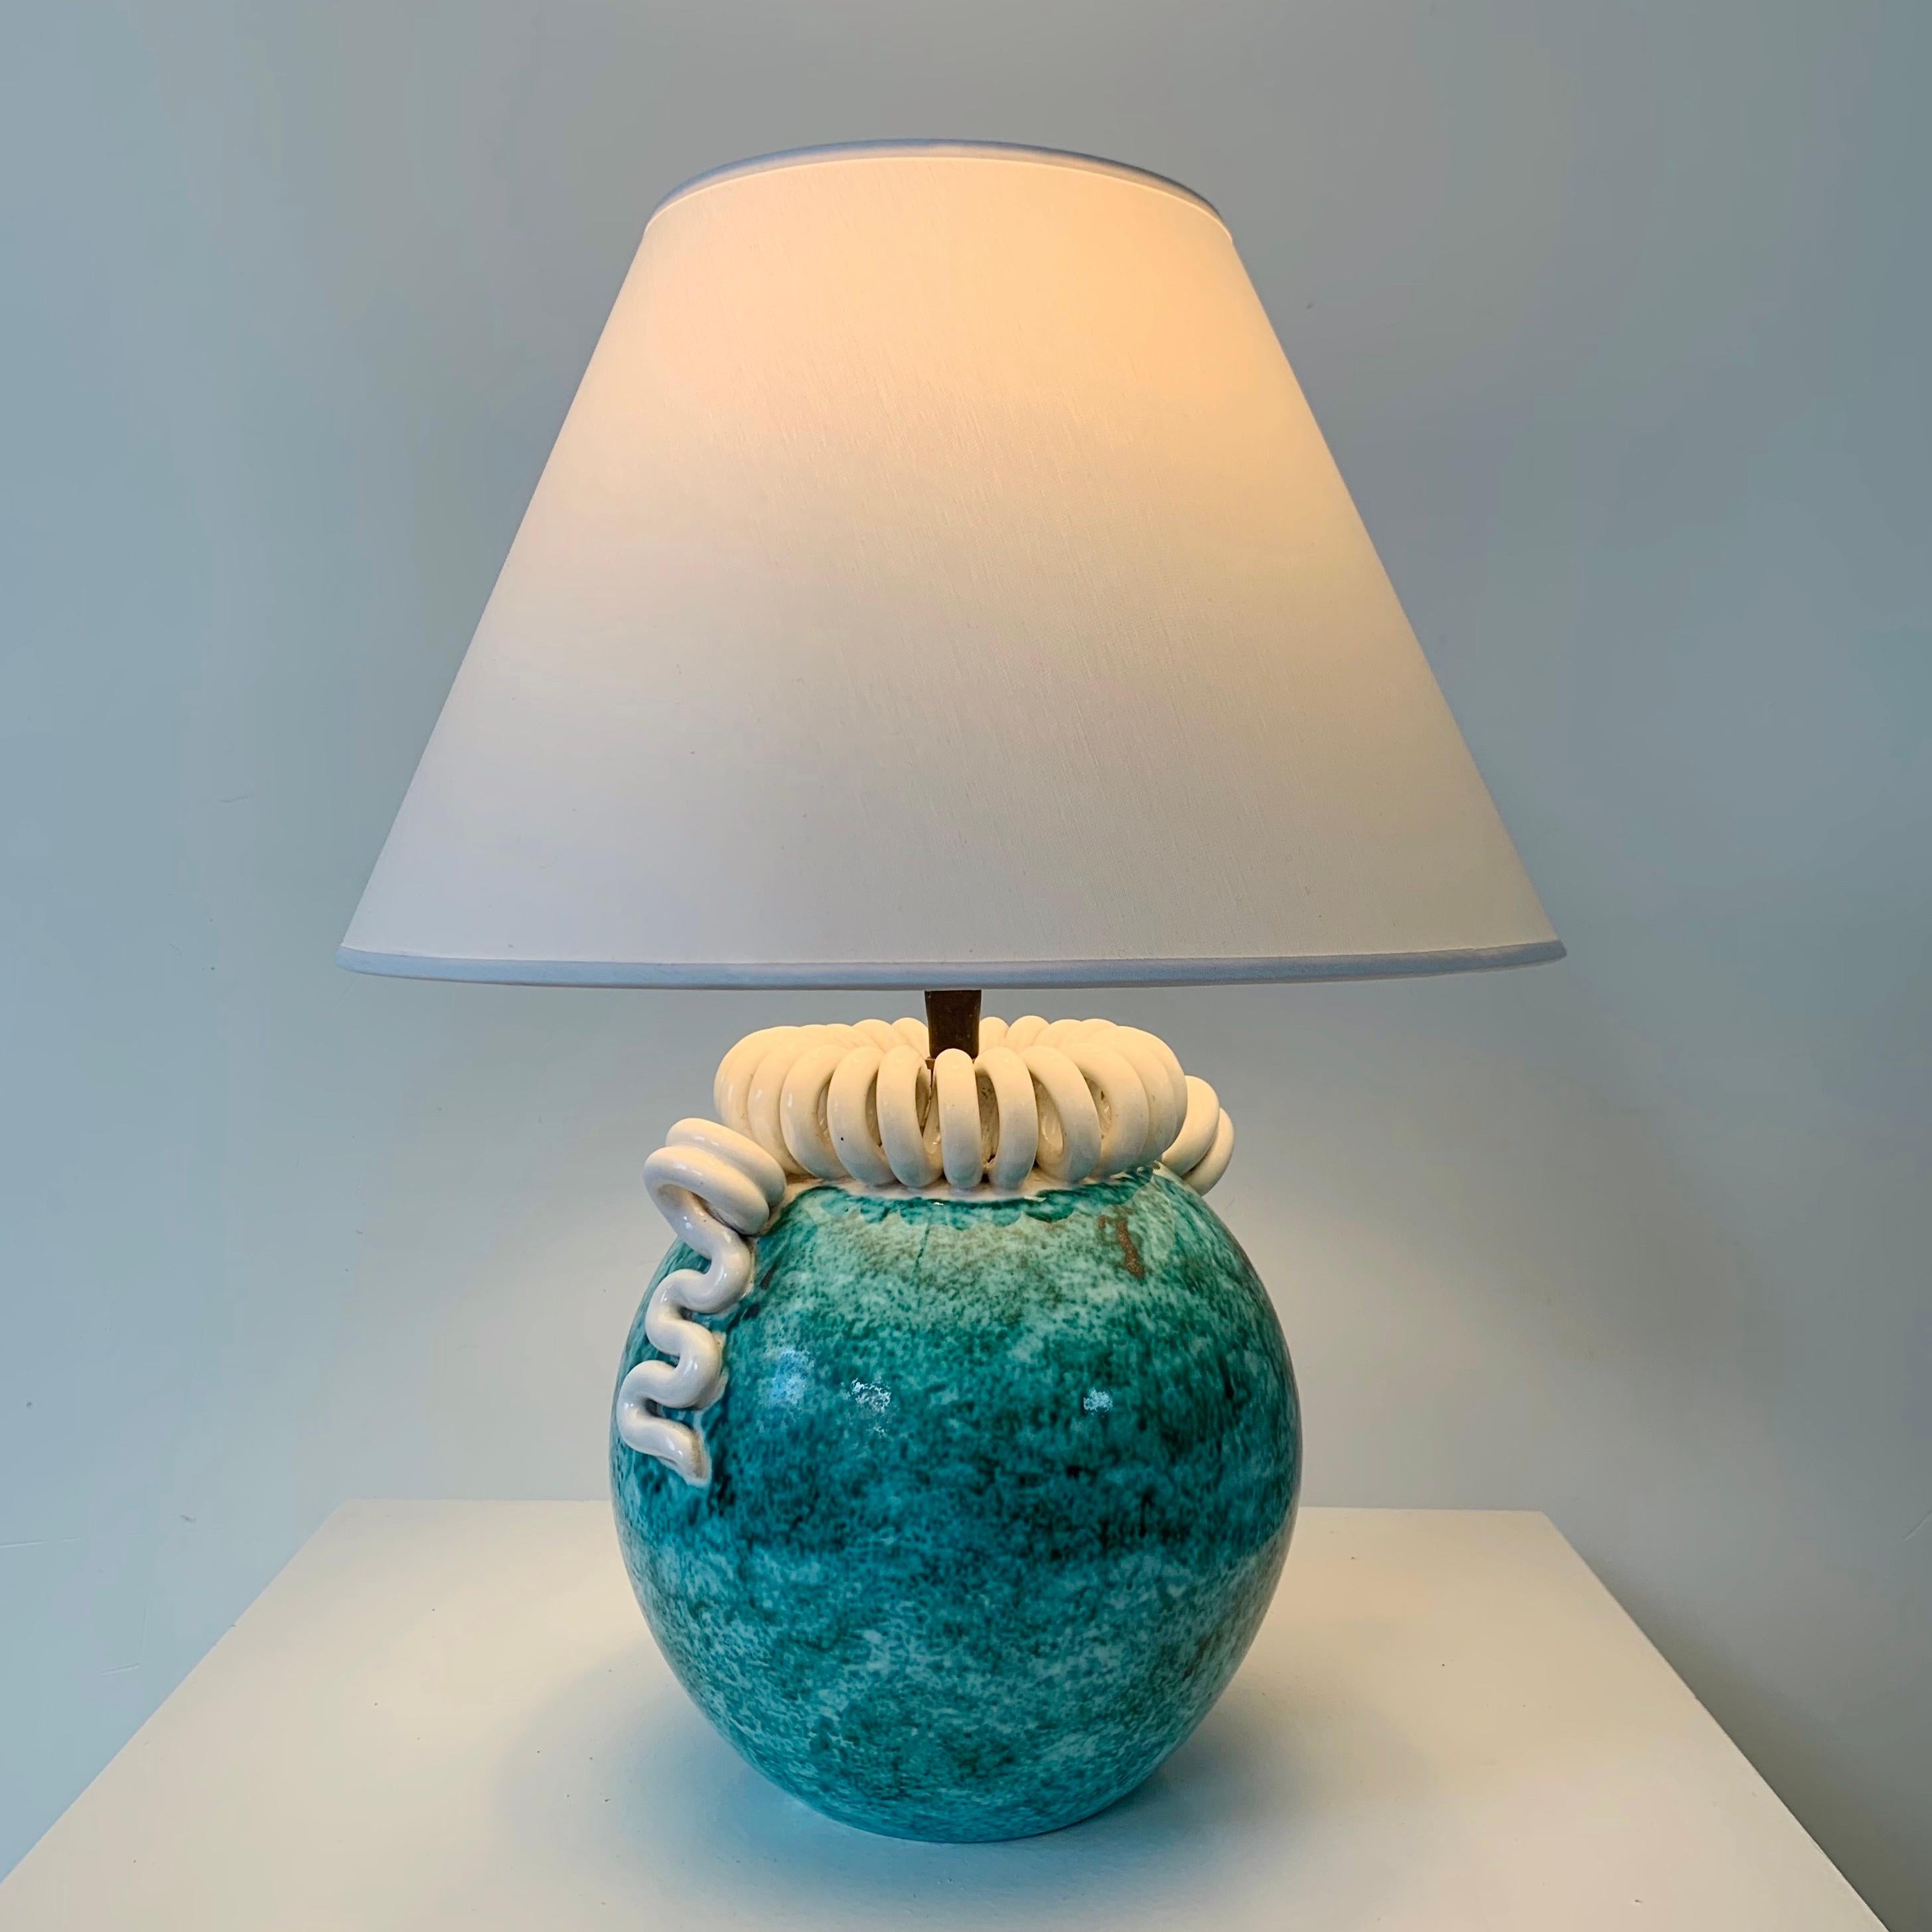 Mid-20th Century French Art Deco Ceramic Table Lamp by Gustave Asch, circa 1930. For Sale